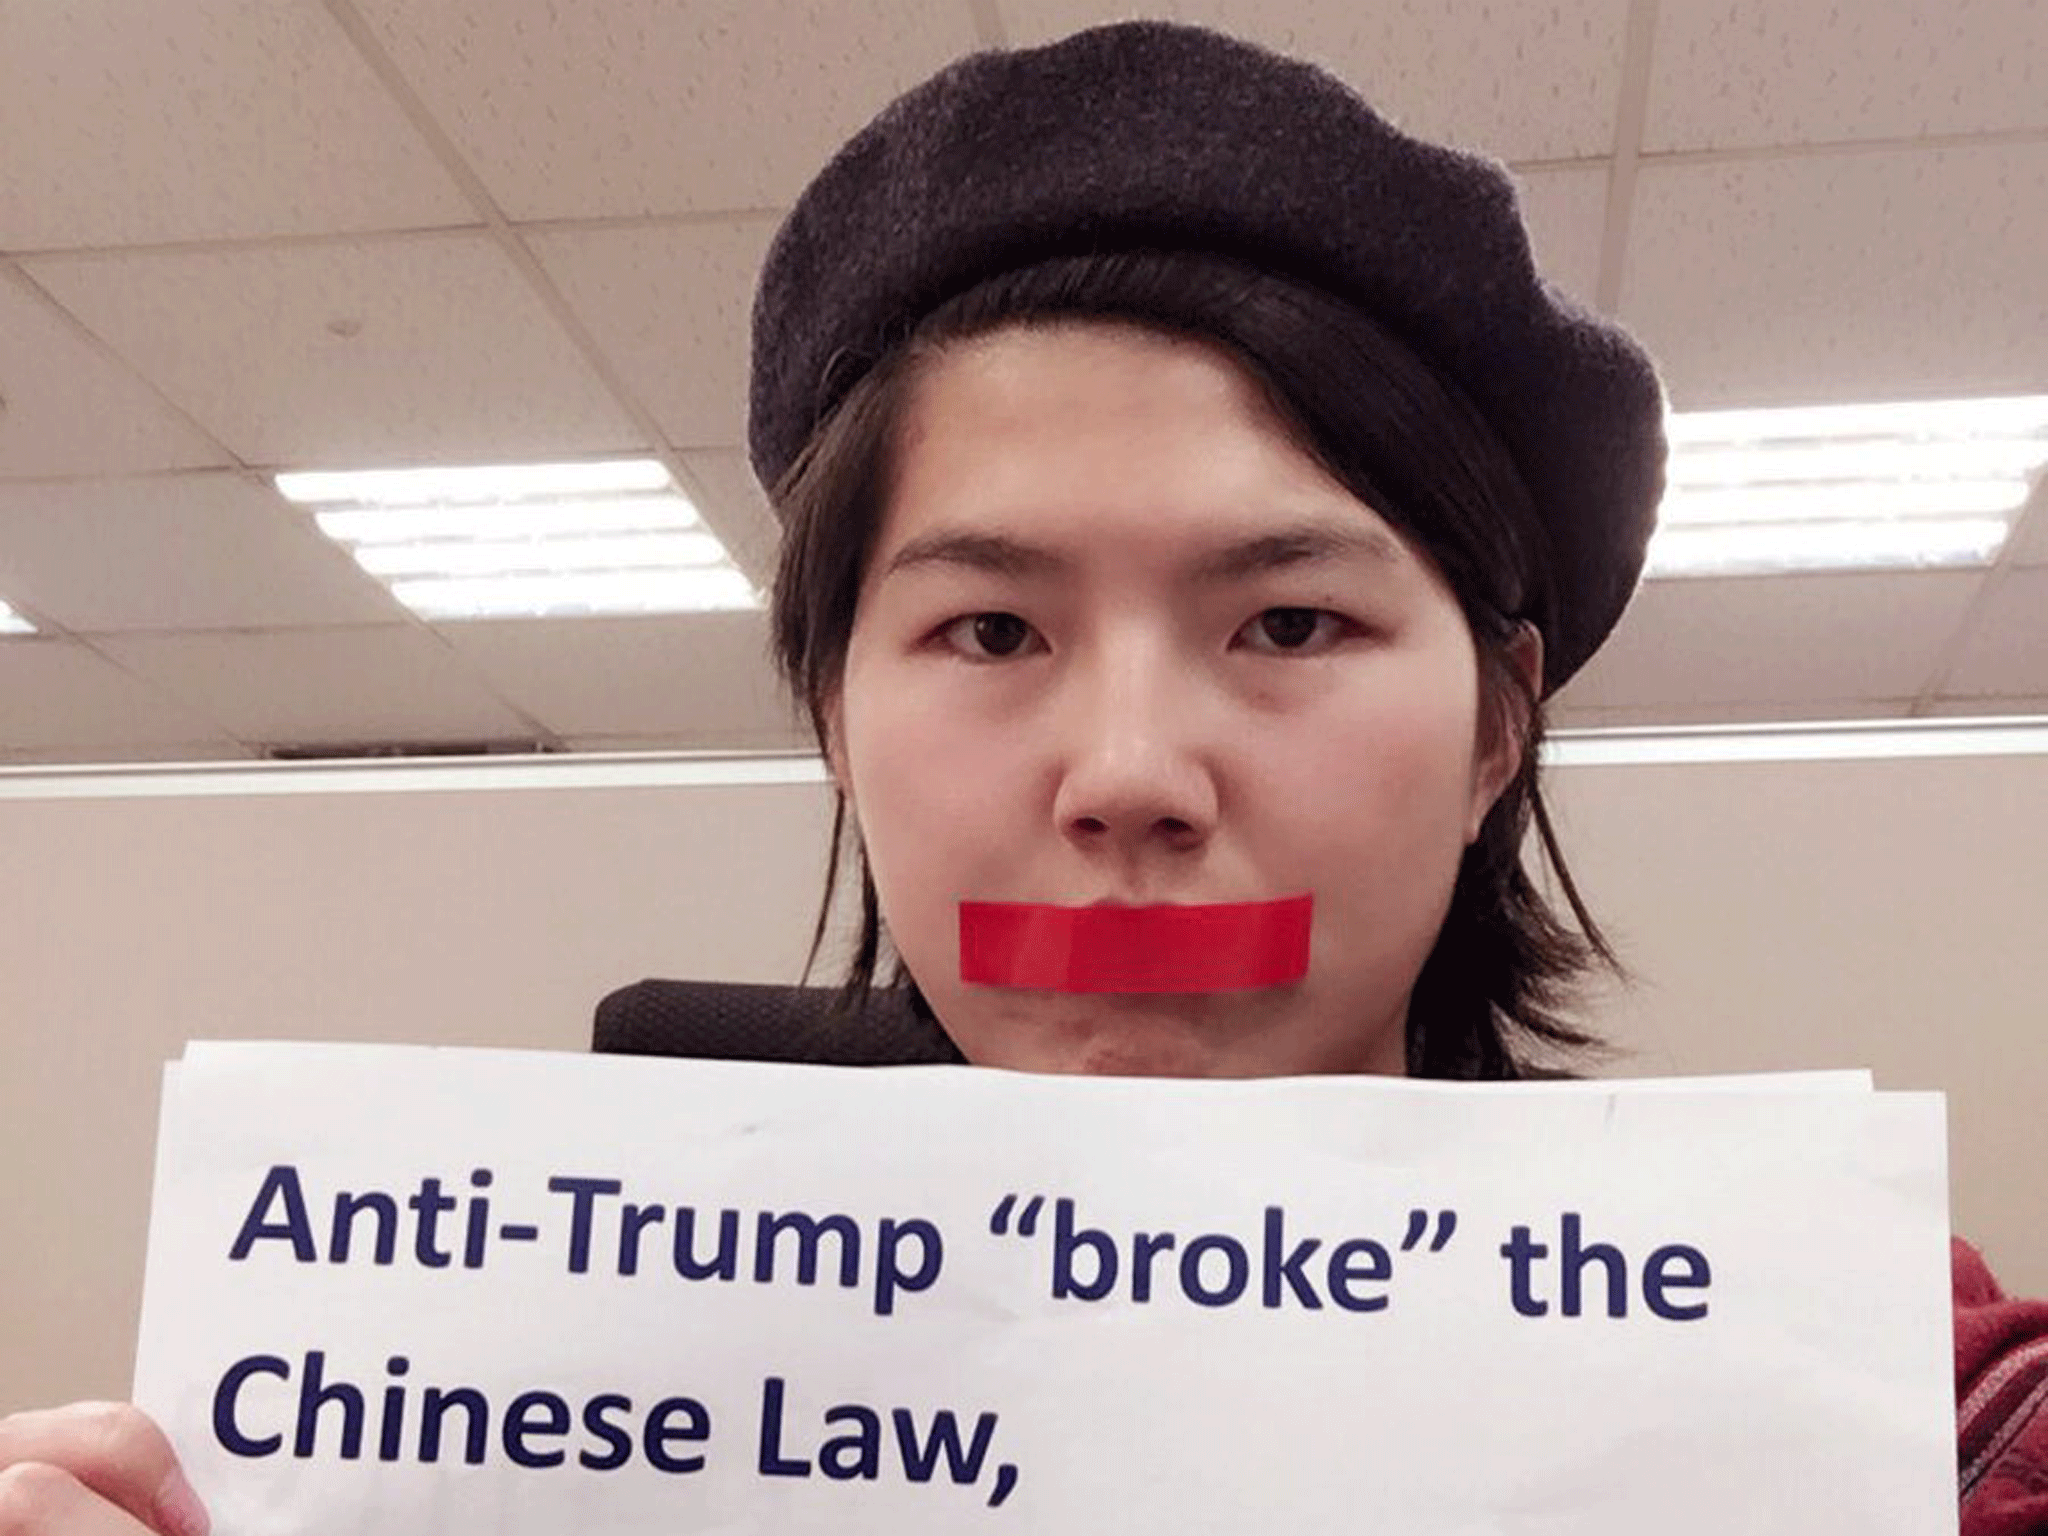 Chinese feminists barred from social media after criticising Trump